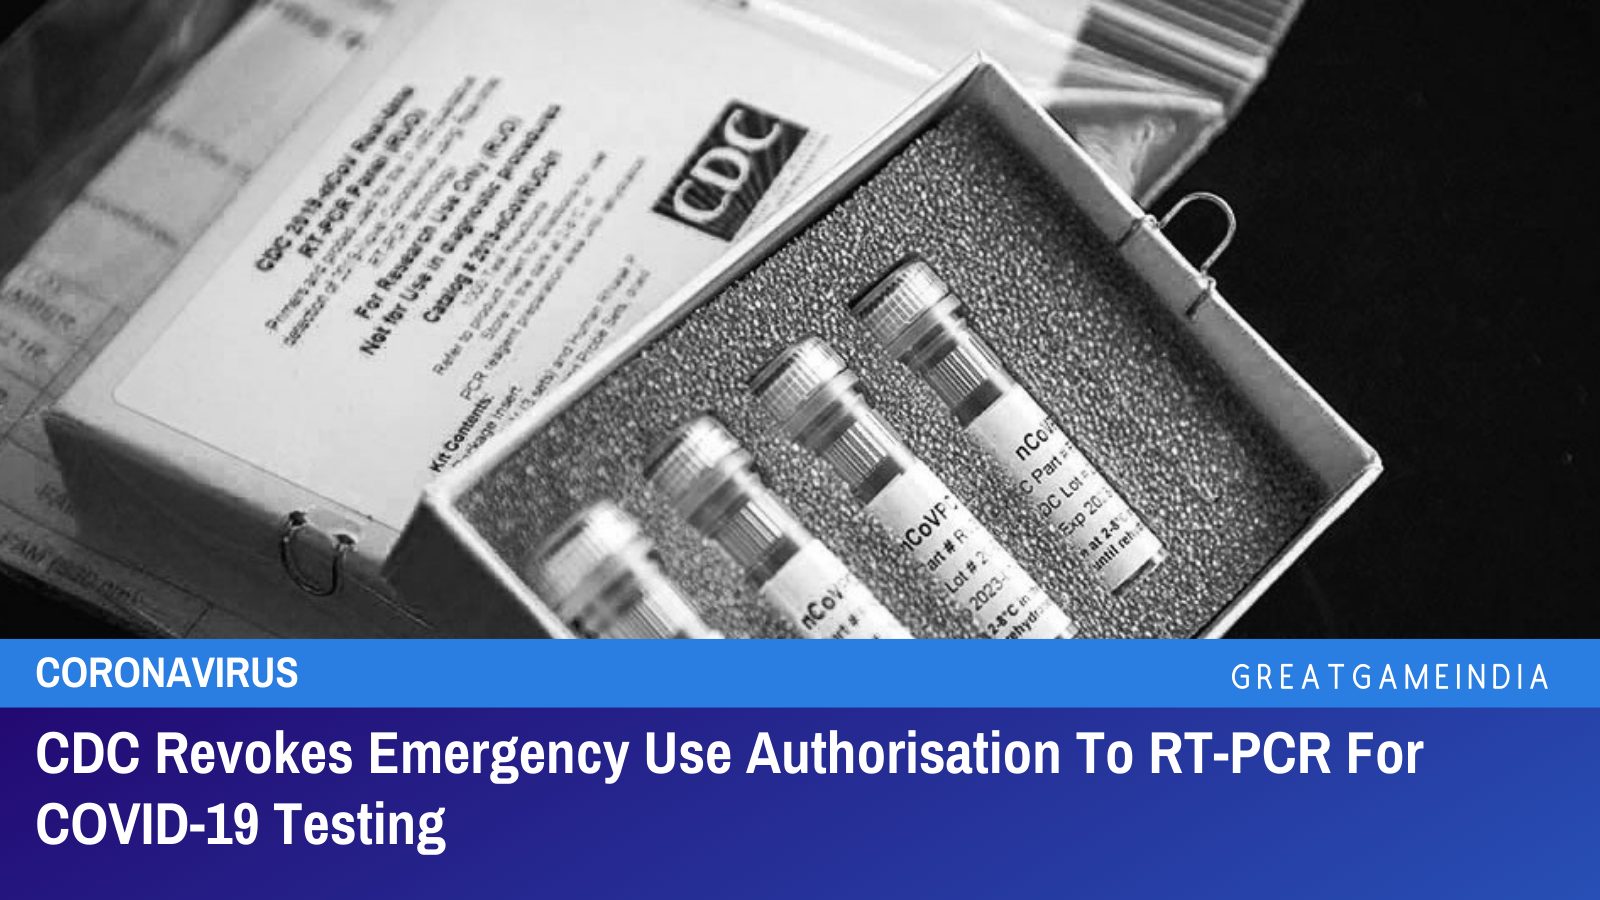 CDC Revokes Emergency Use Authorisation To RT-PCR For COVID-19 Testing